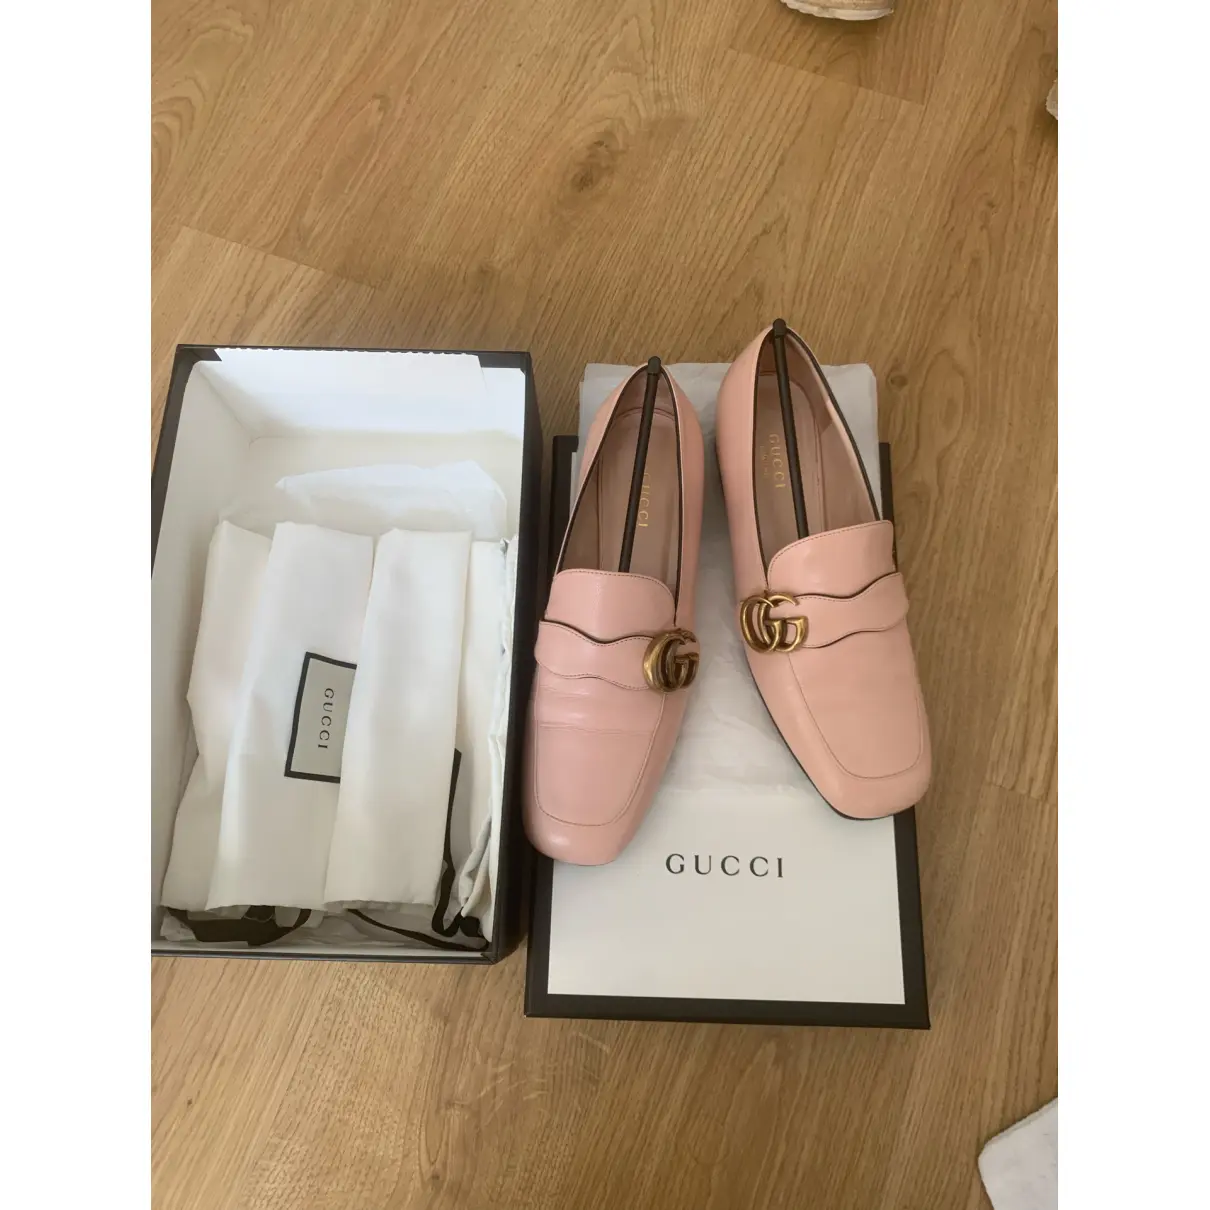 Buy Gucci Marmont leather flats online